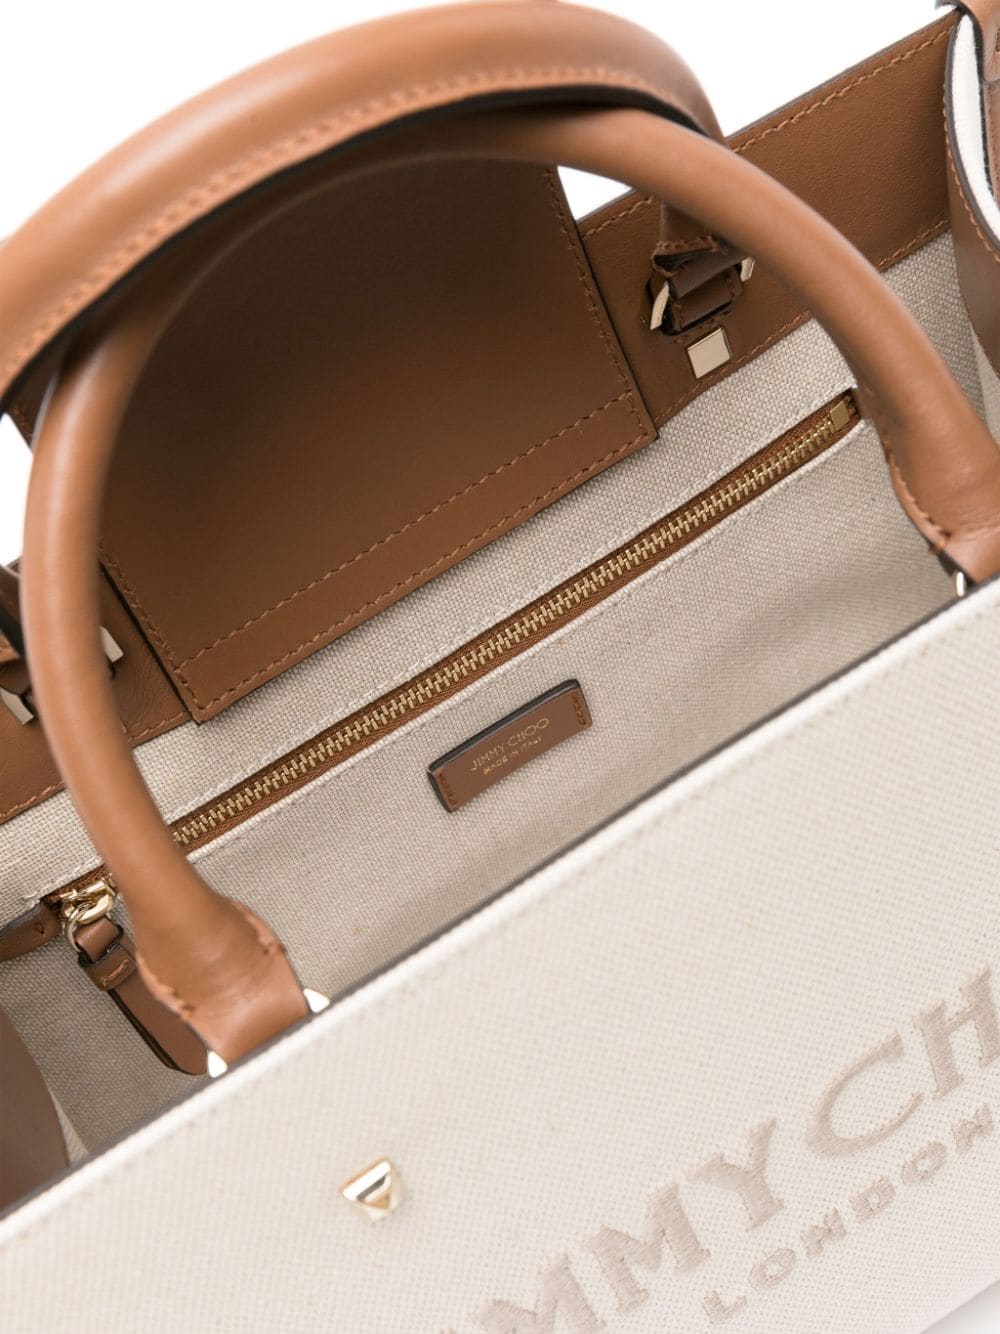 JIMMY CHOO Beige/Brown Recycled Cotton and Leather Tote Handbag for Women